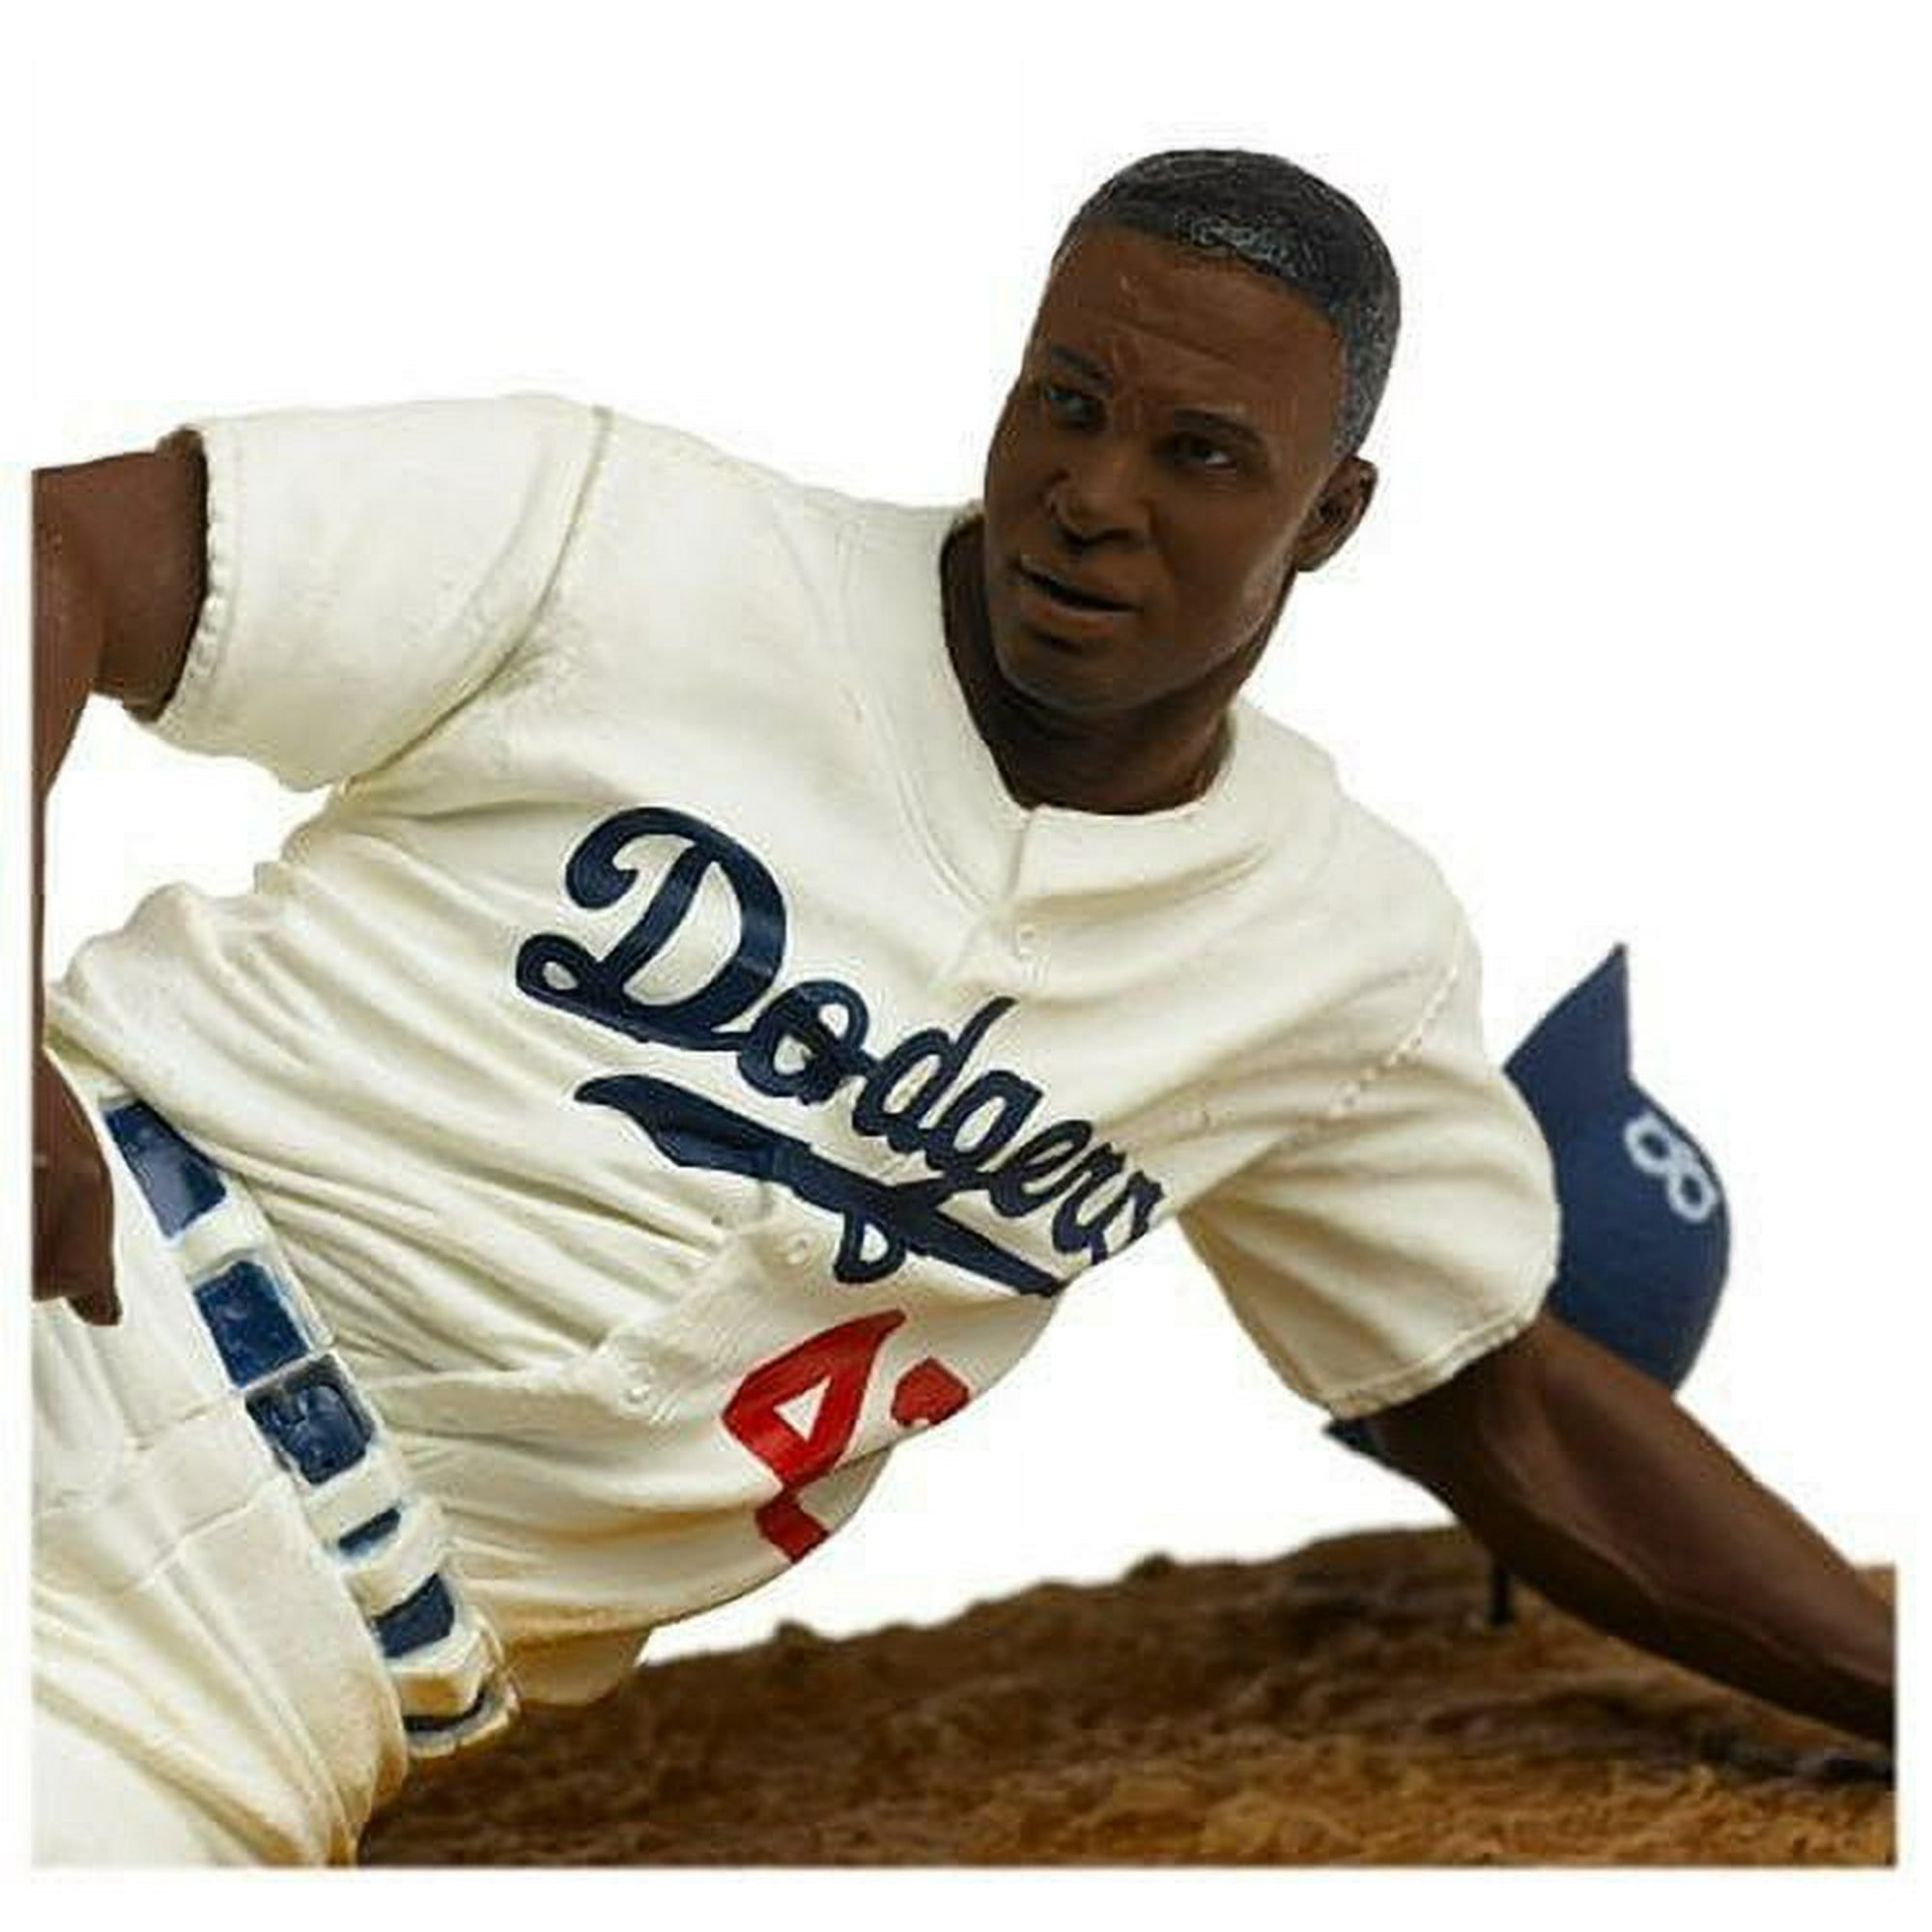 McFarlane MLB Cooperstown Collection Series 3 Jackie Robinson